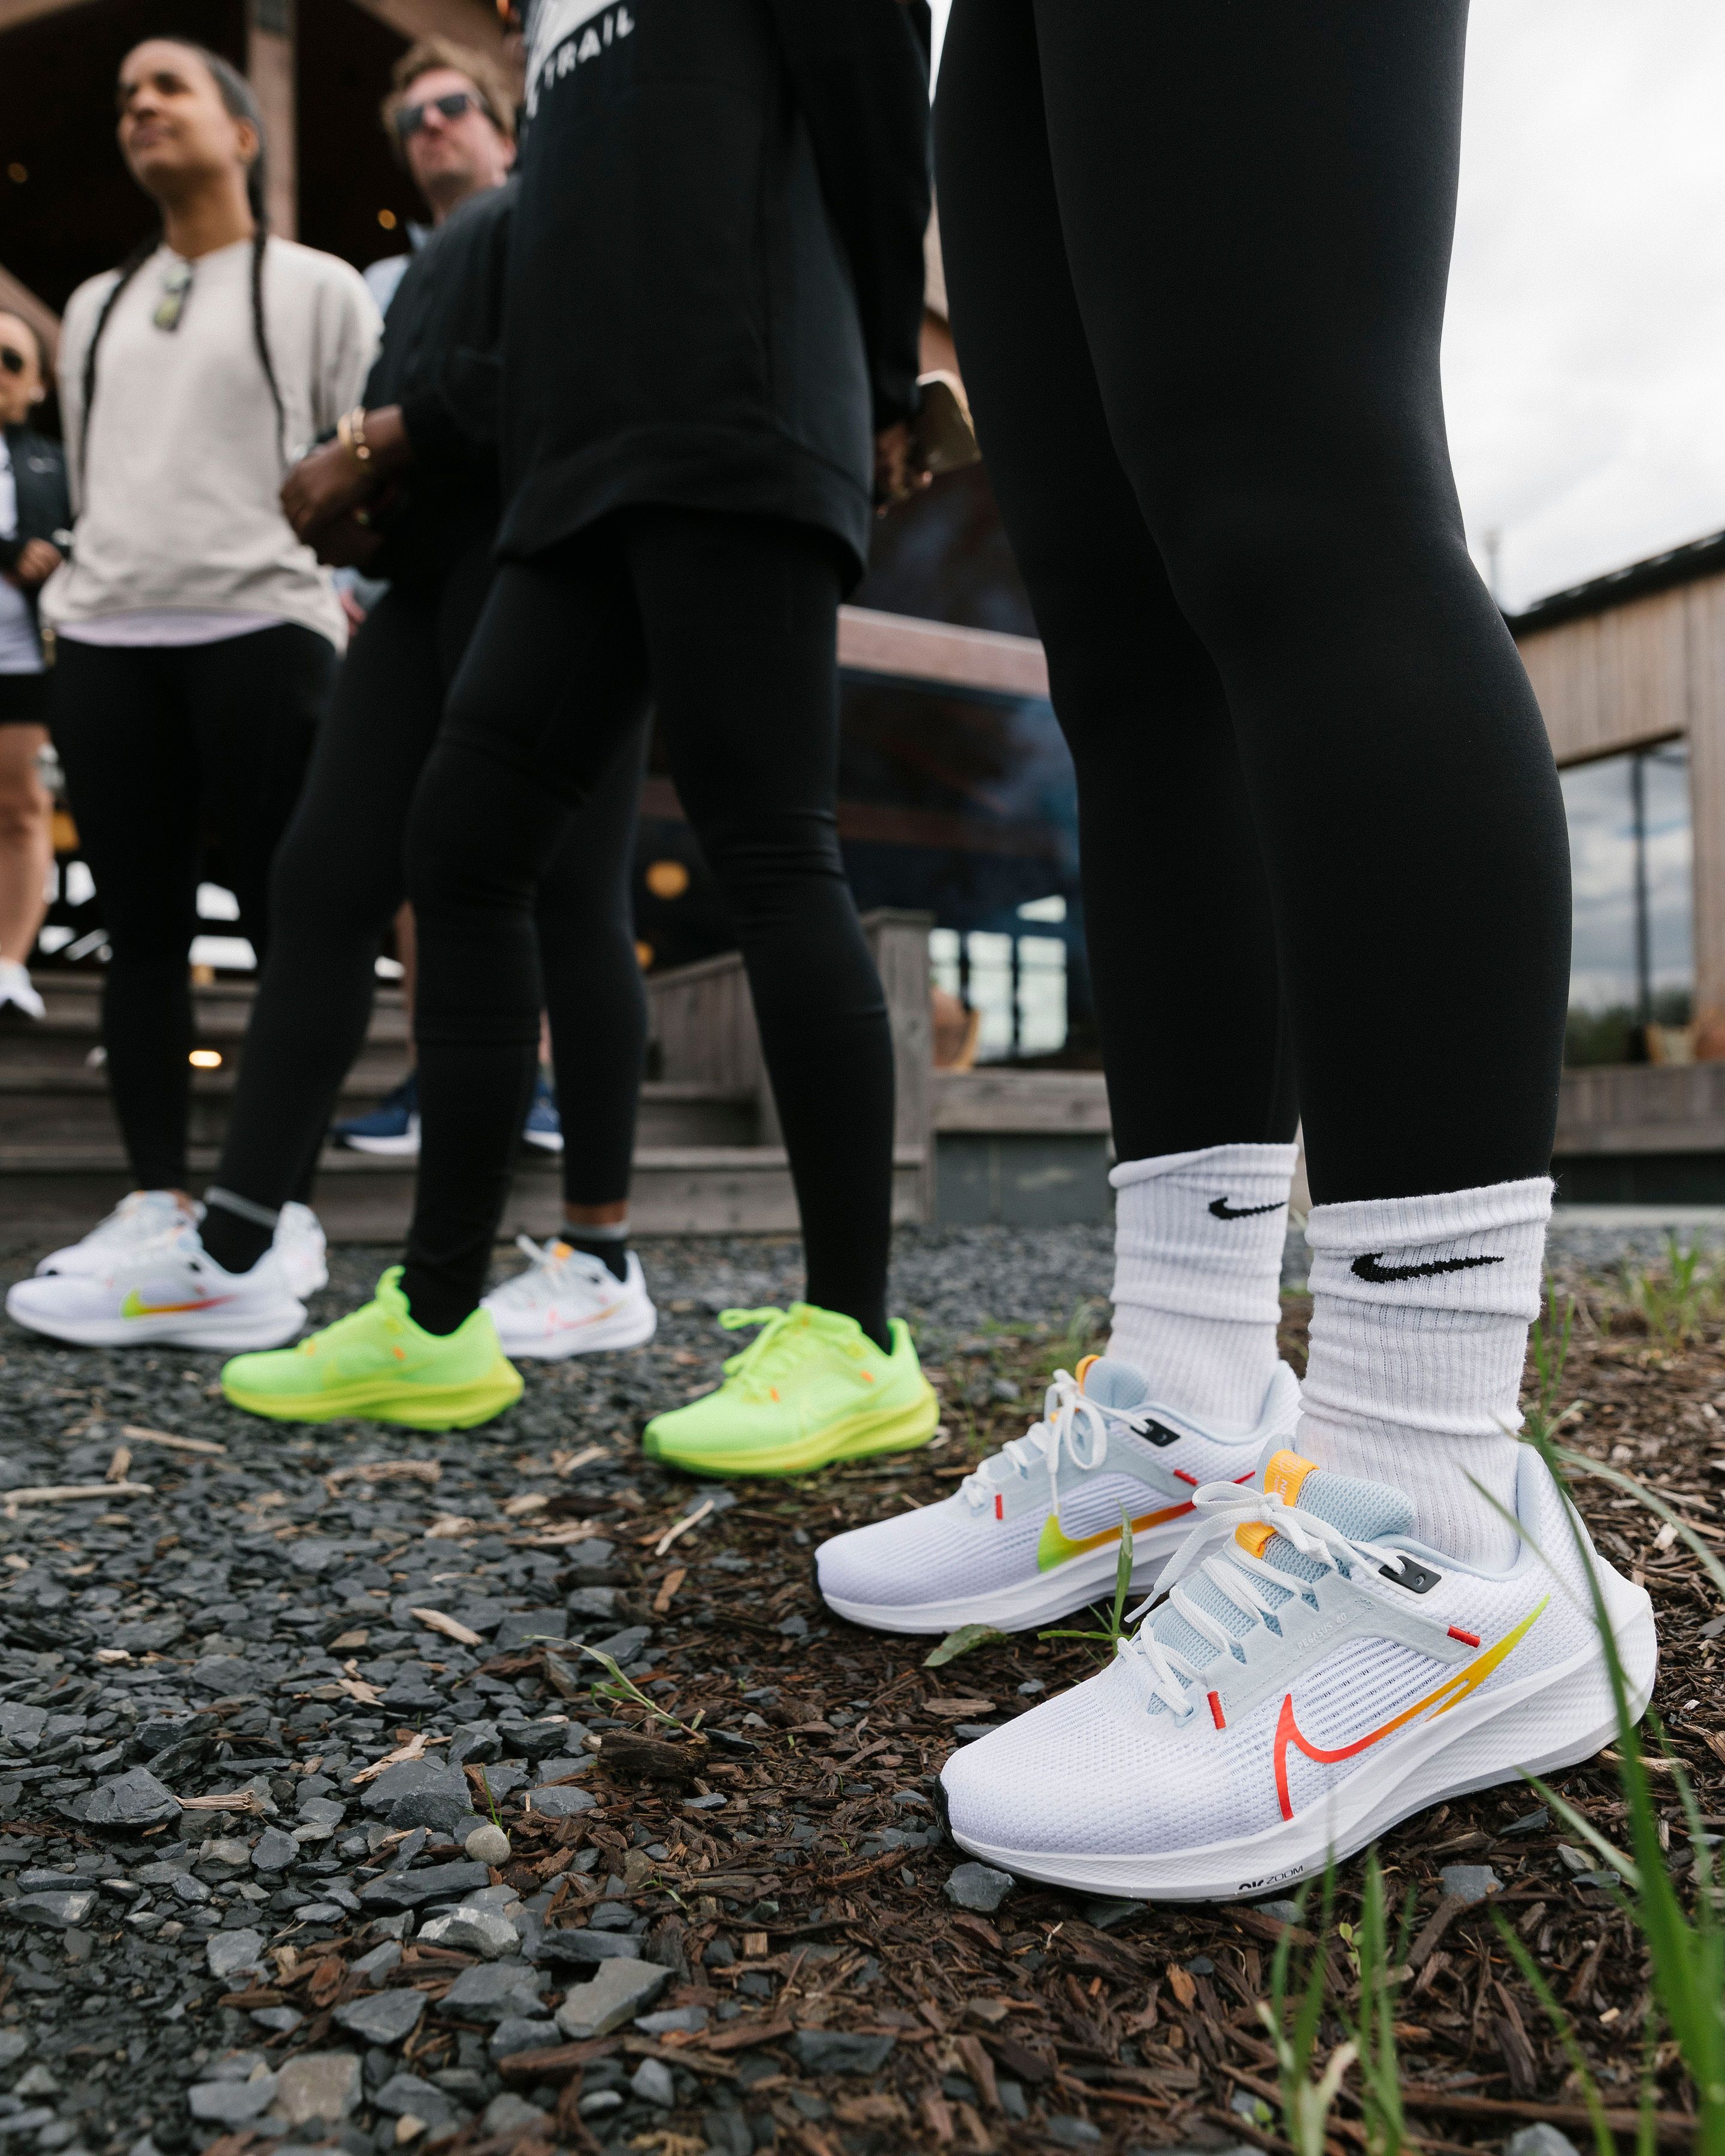 My Experience at Nike 2023